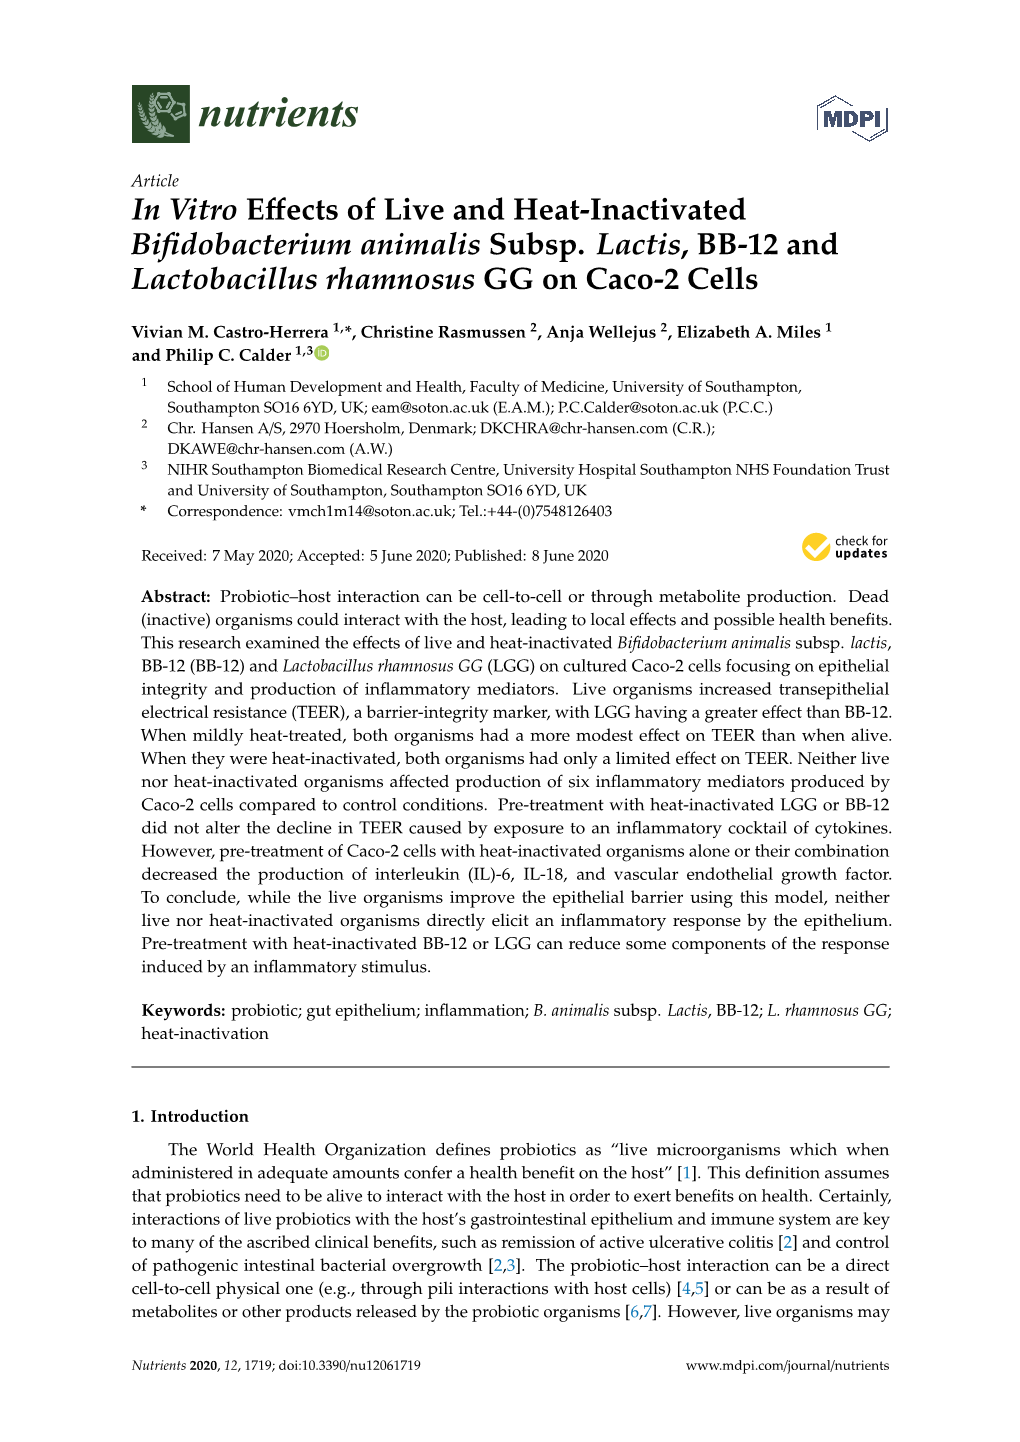 In Vitro Effects of Live and Heat-Inactivated Bifidobacterium